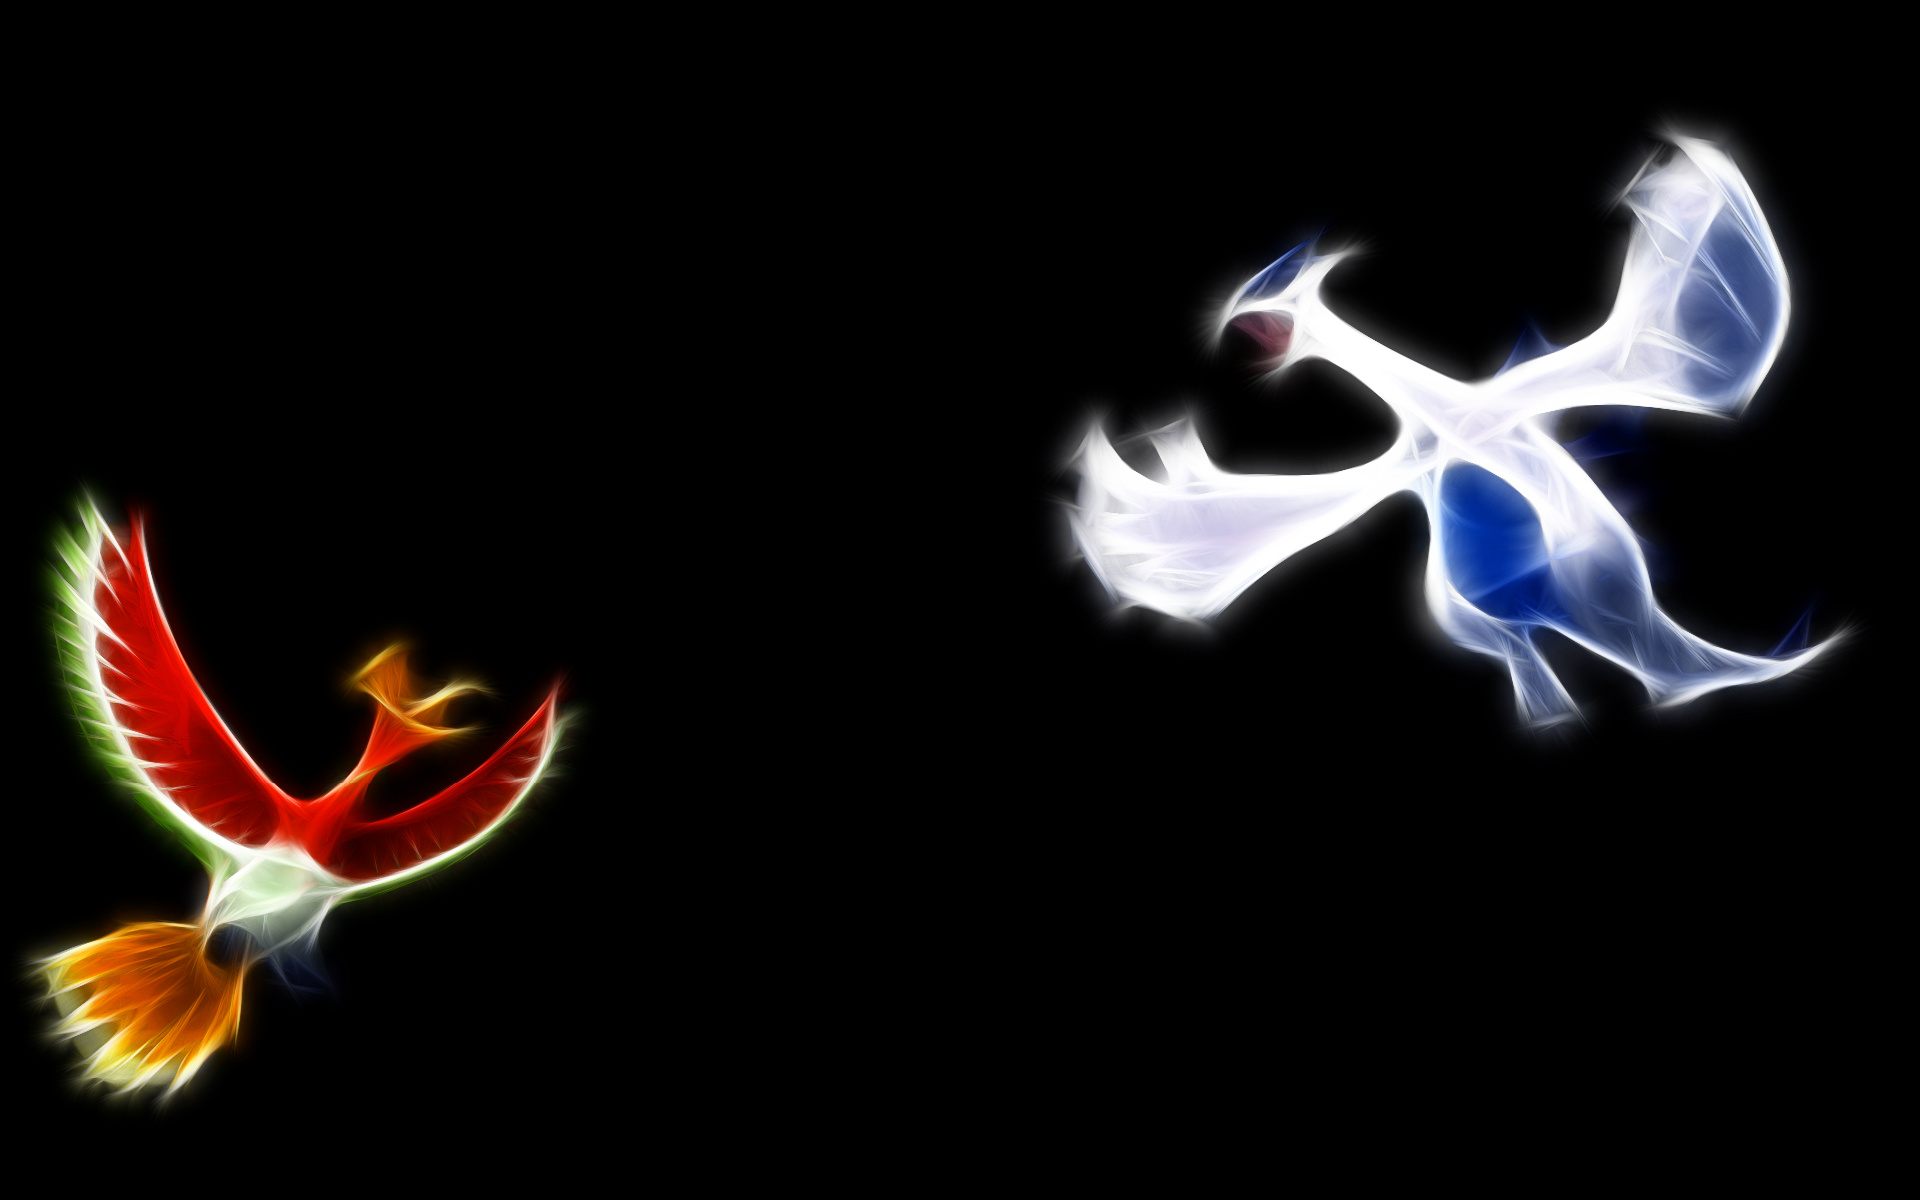 47+ HO OH and Lugia Wallpaper 1920x1200